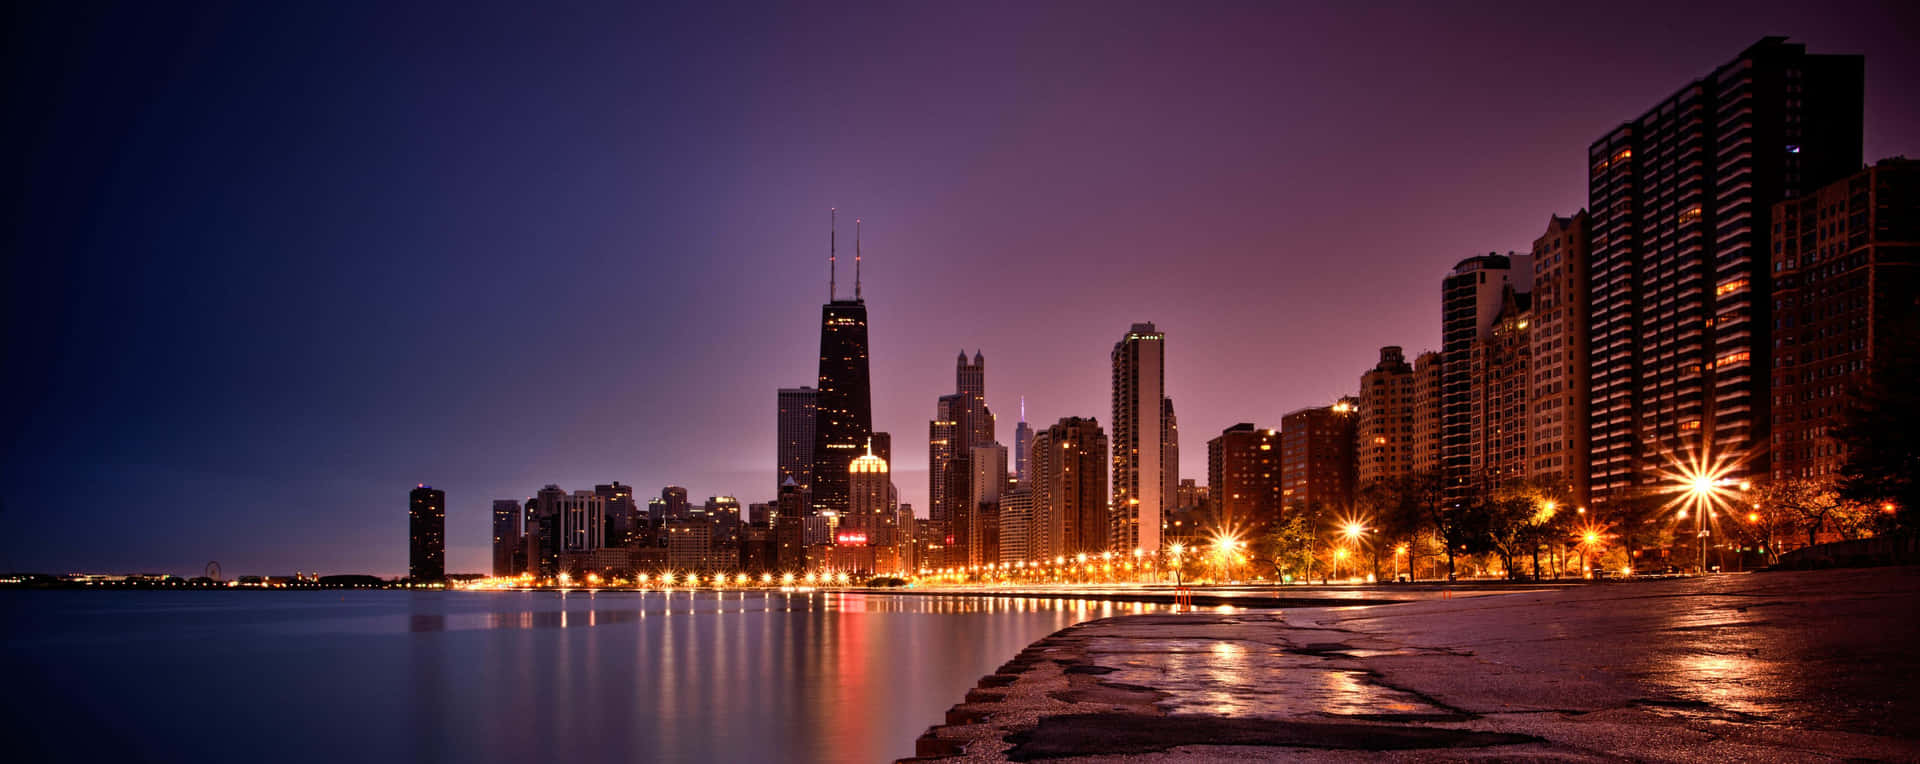 The Magnificent Chicago Skyline